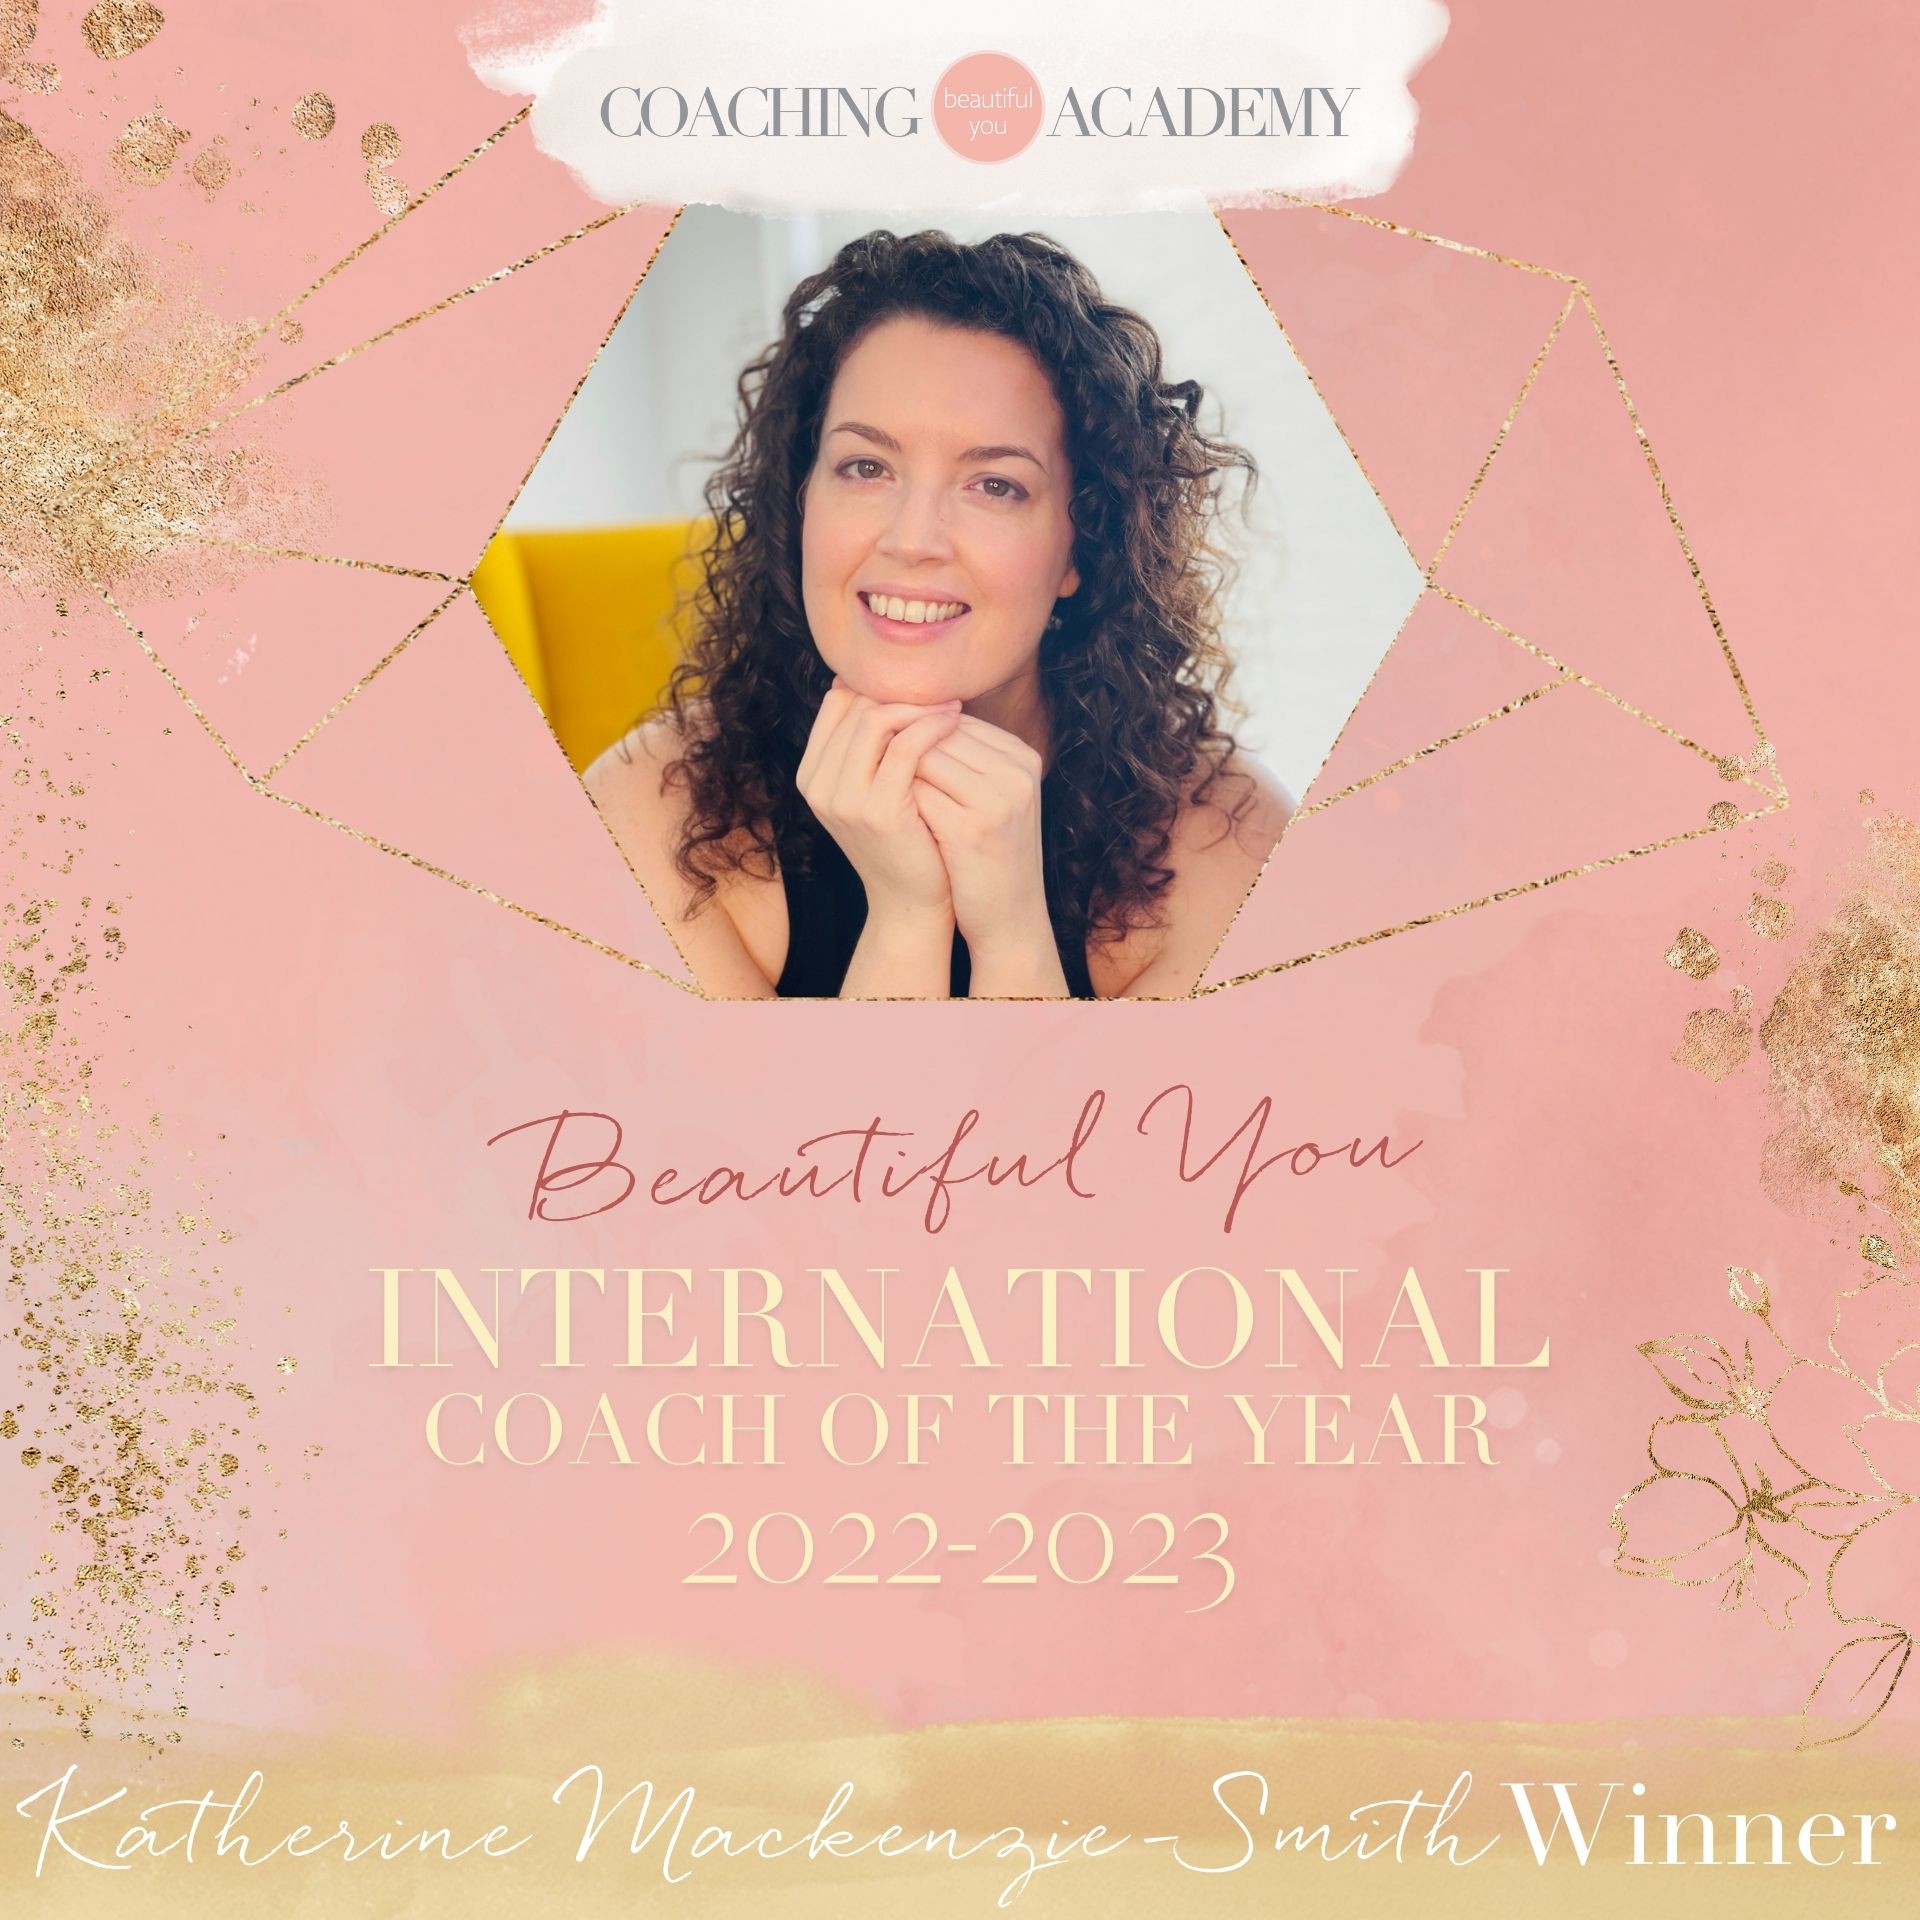 Beautiful You Coaching Academy graphic. Photo of Katherine with the text Beautiful You International Coach of the Year 2022-2023 Katherine Mackenzie-Smith